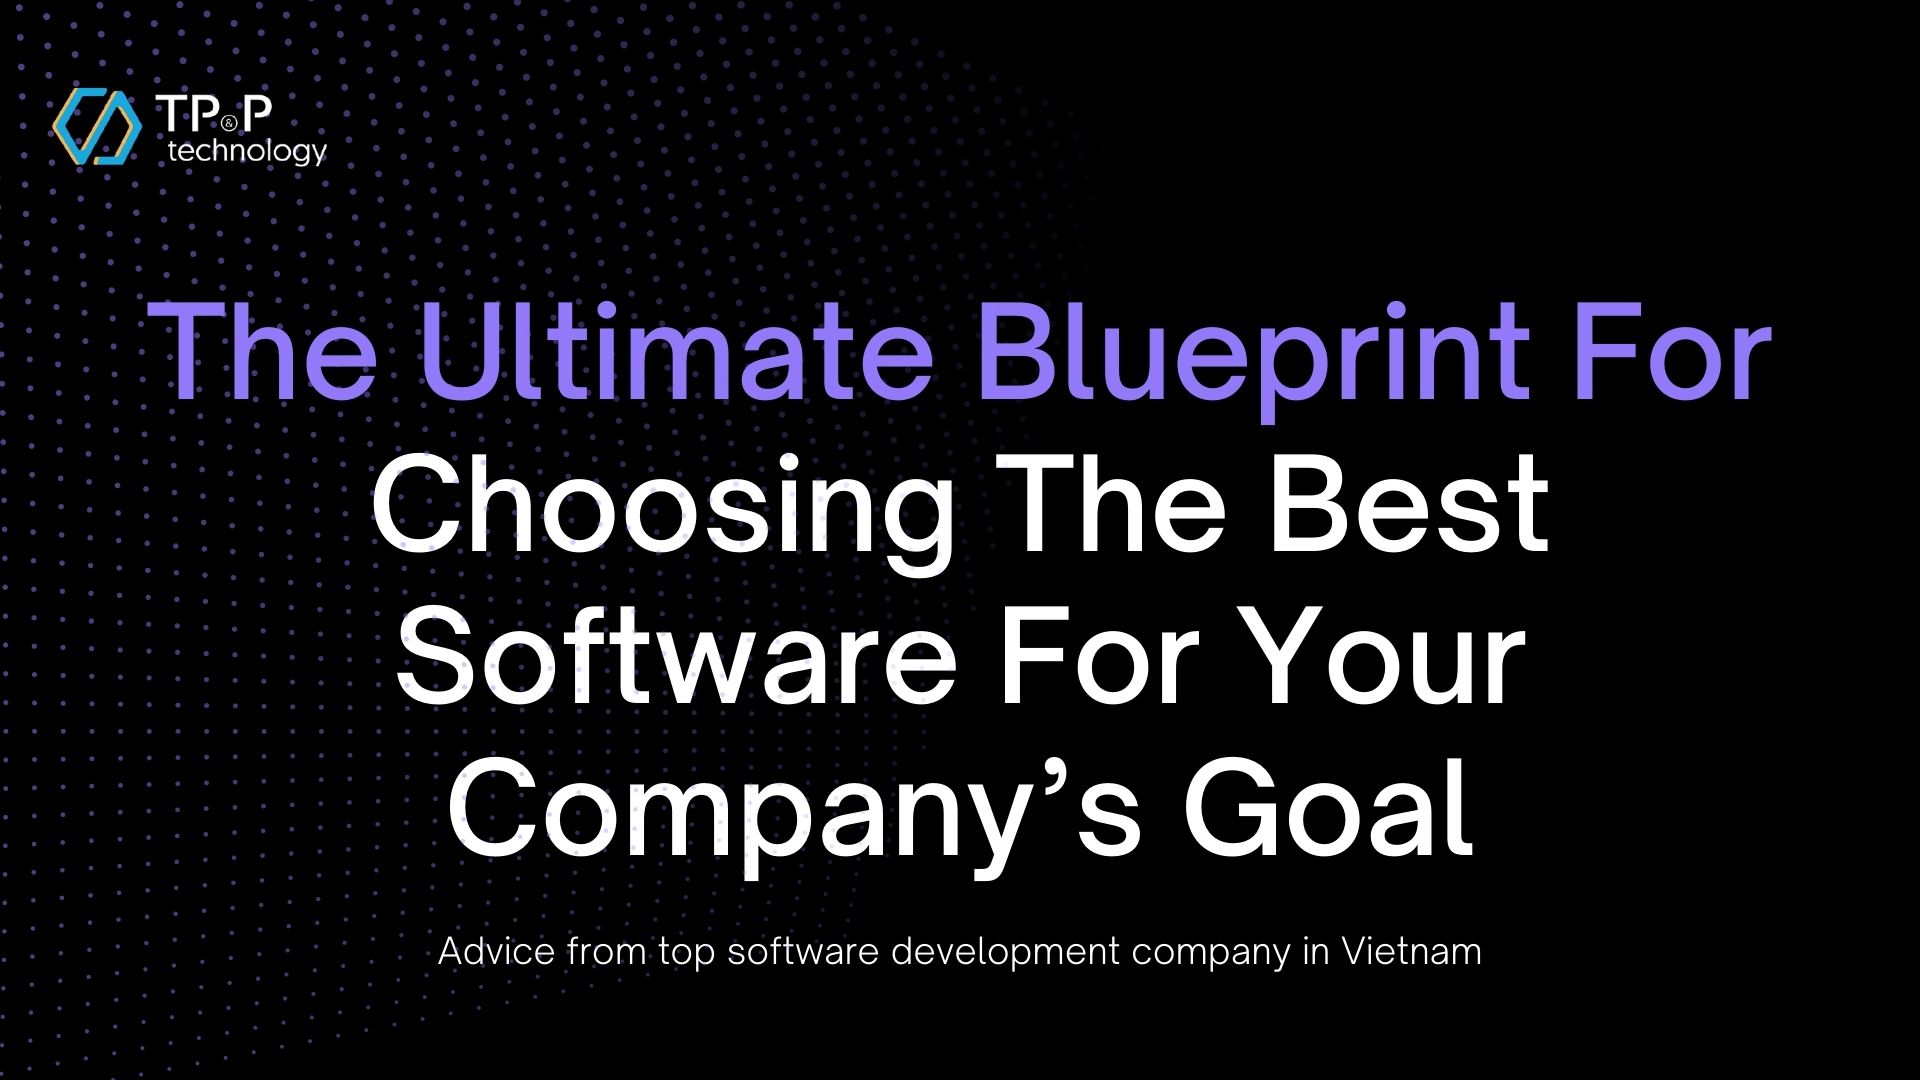 The Ultimate Blueprint For Choosing The Best Software For Your Company’s Goal